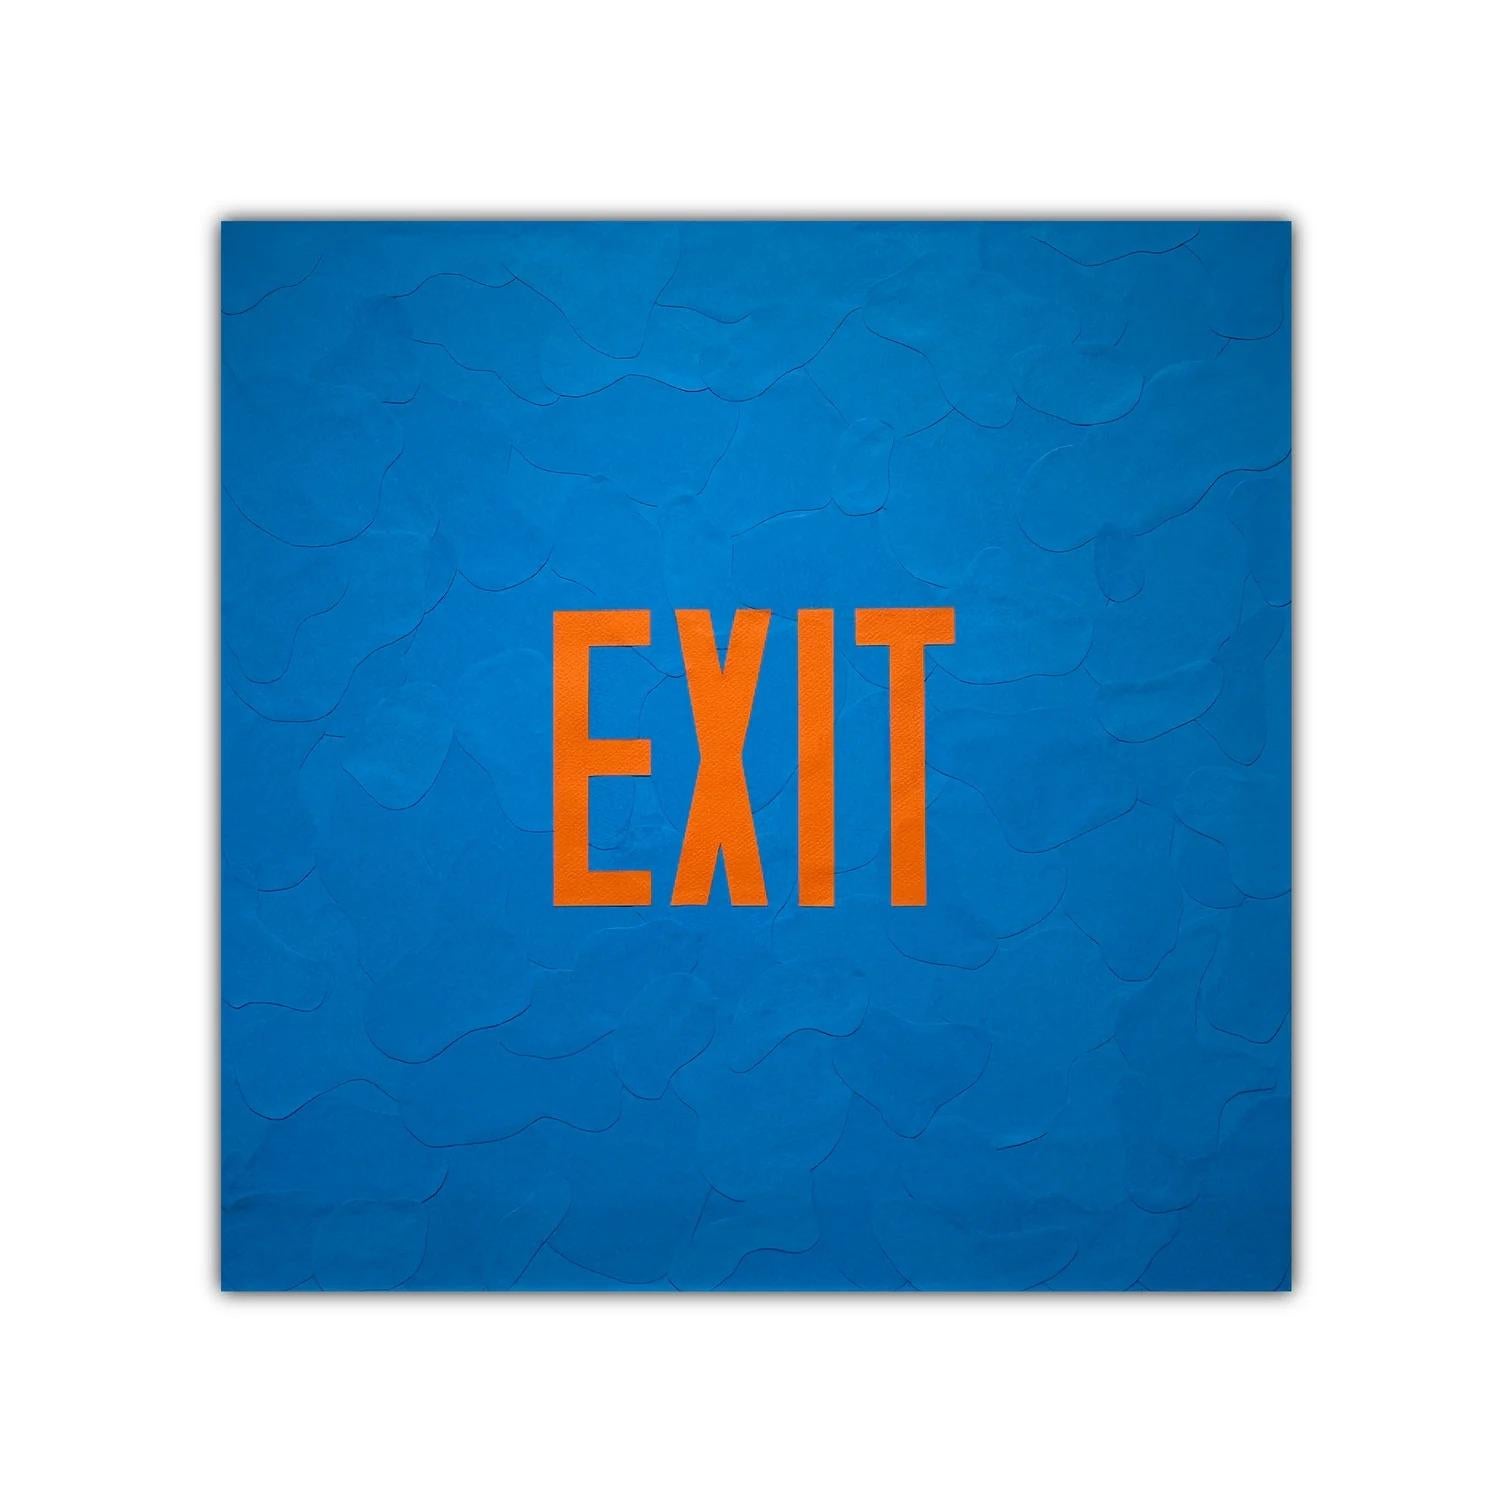 EXIT Collage by Exit Ceren, Represented by Tuleste Factory - Mixed Media Art by Ceren Arslan